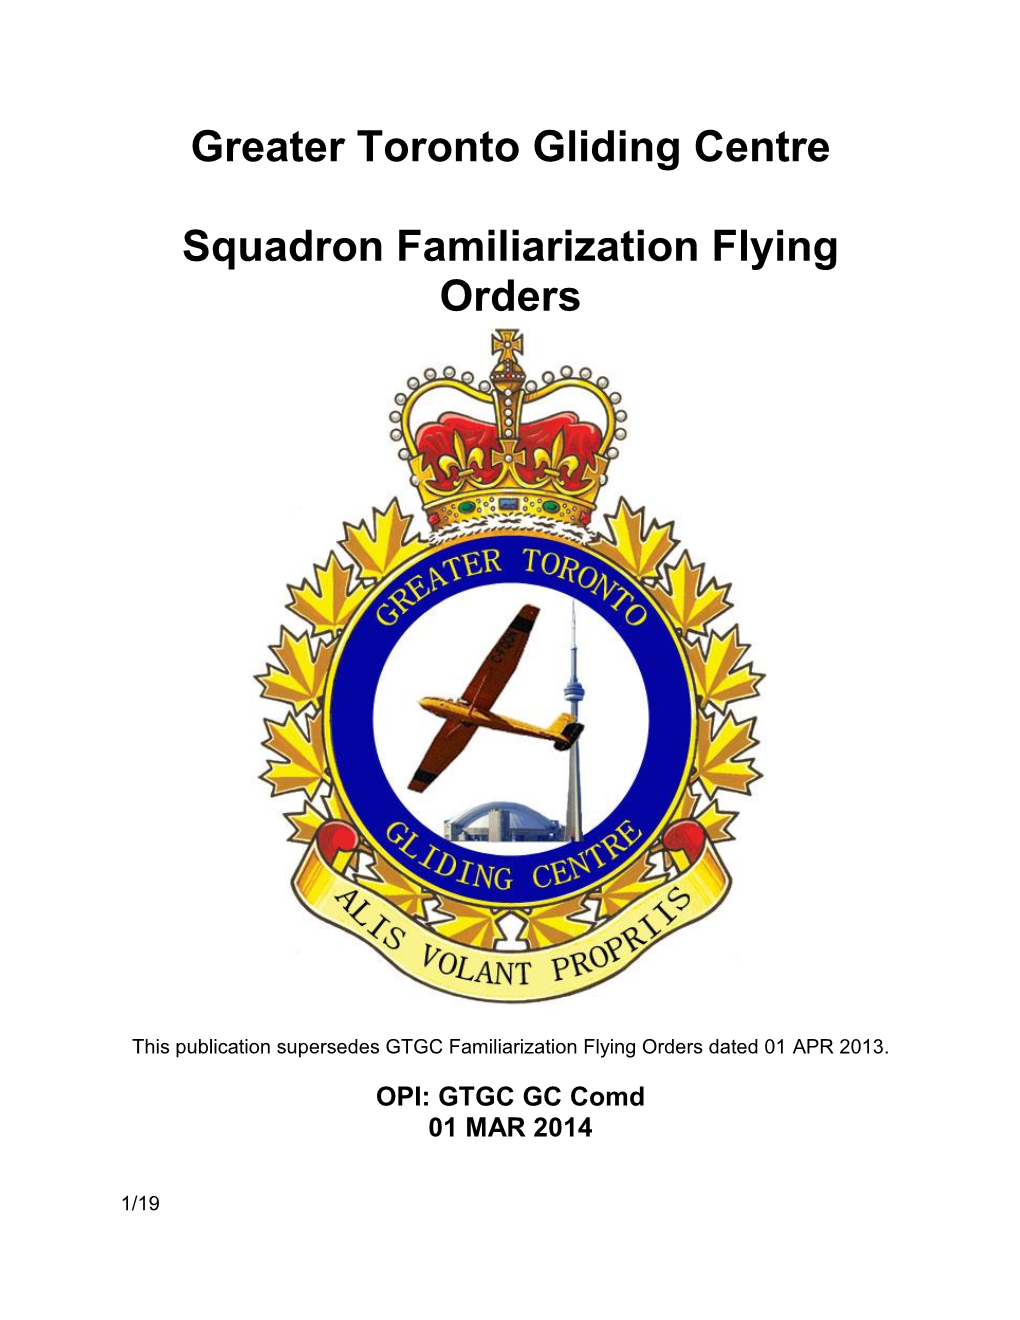 Squadron Familiarization Flying Orders